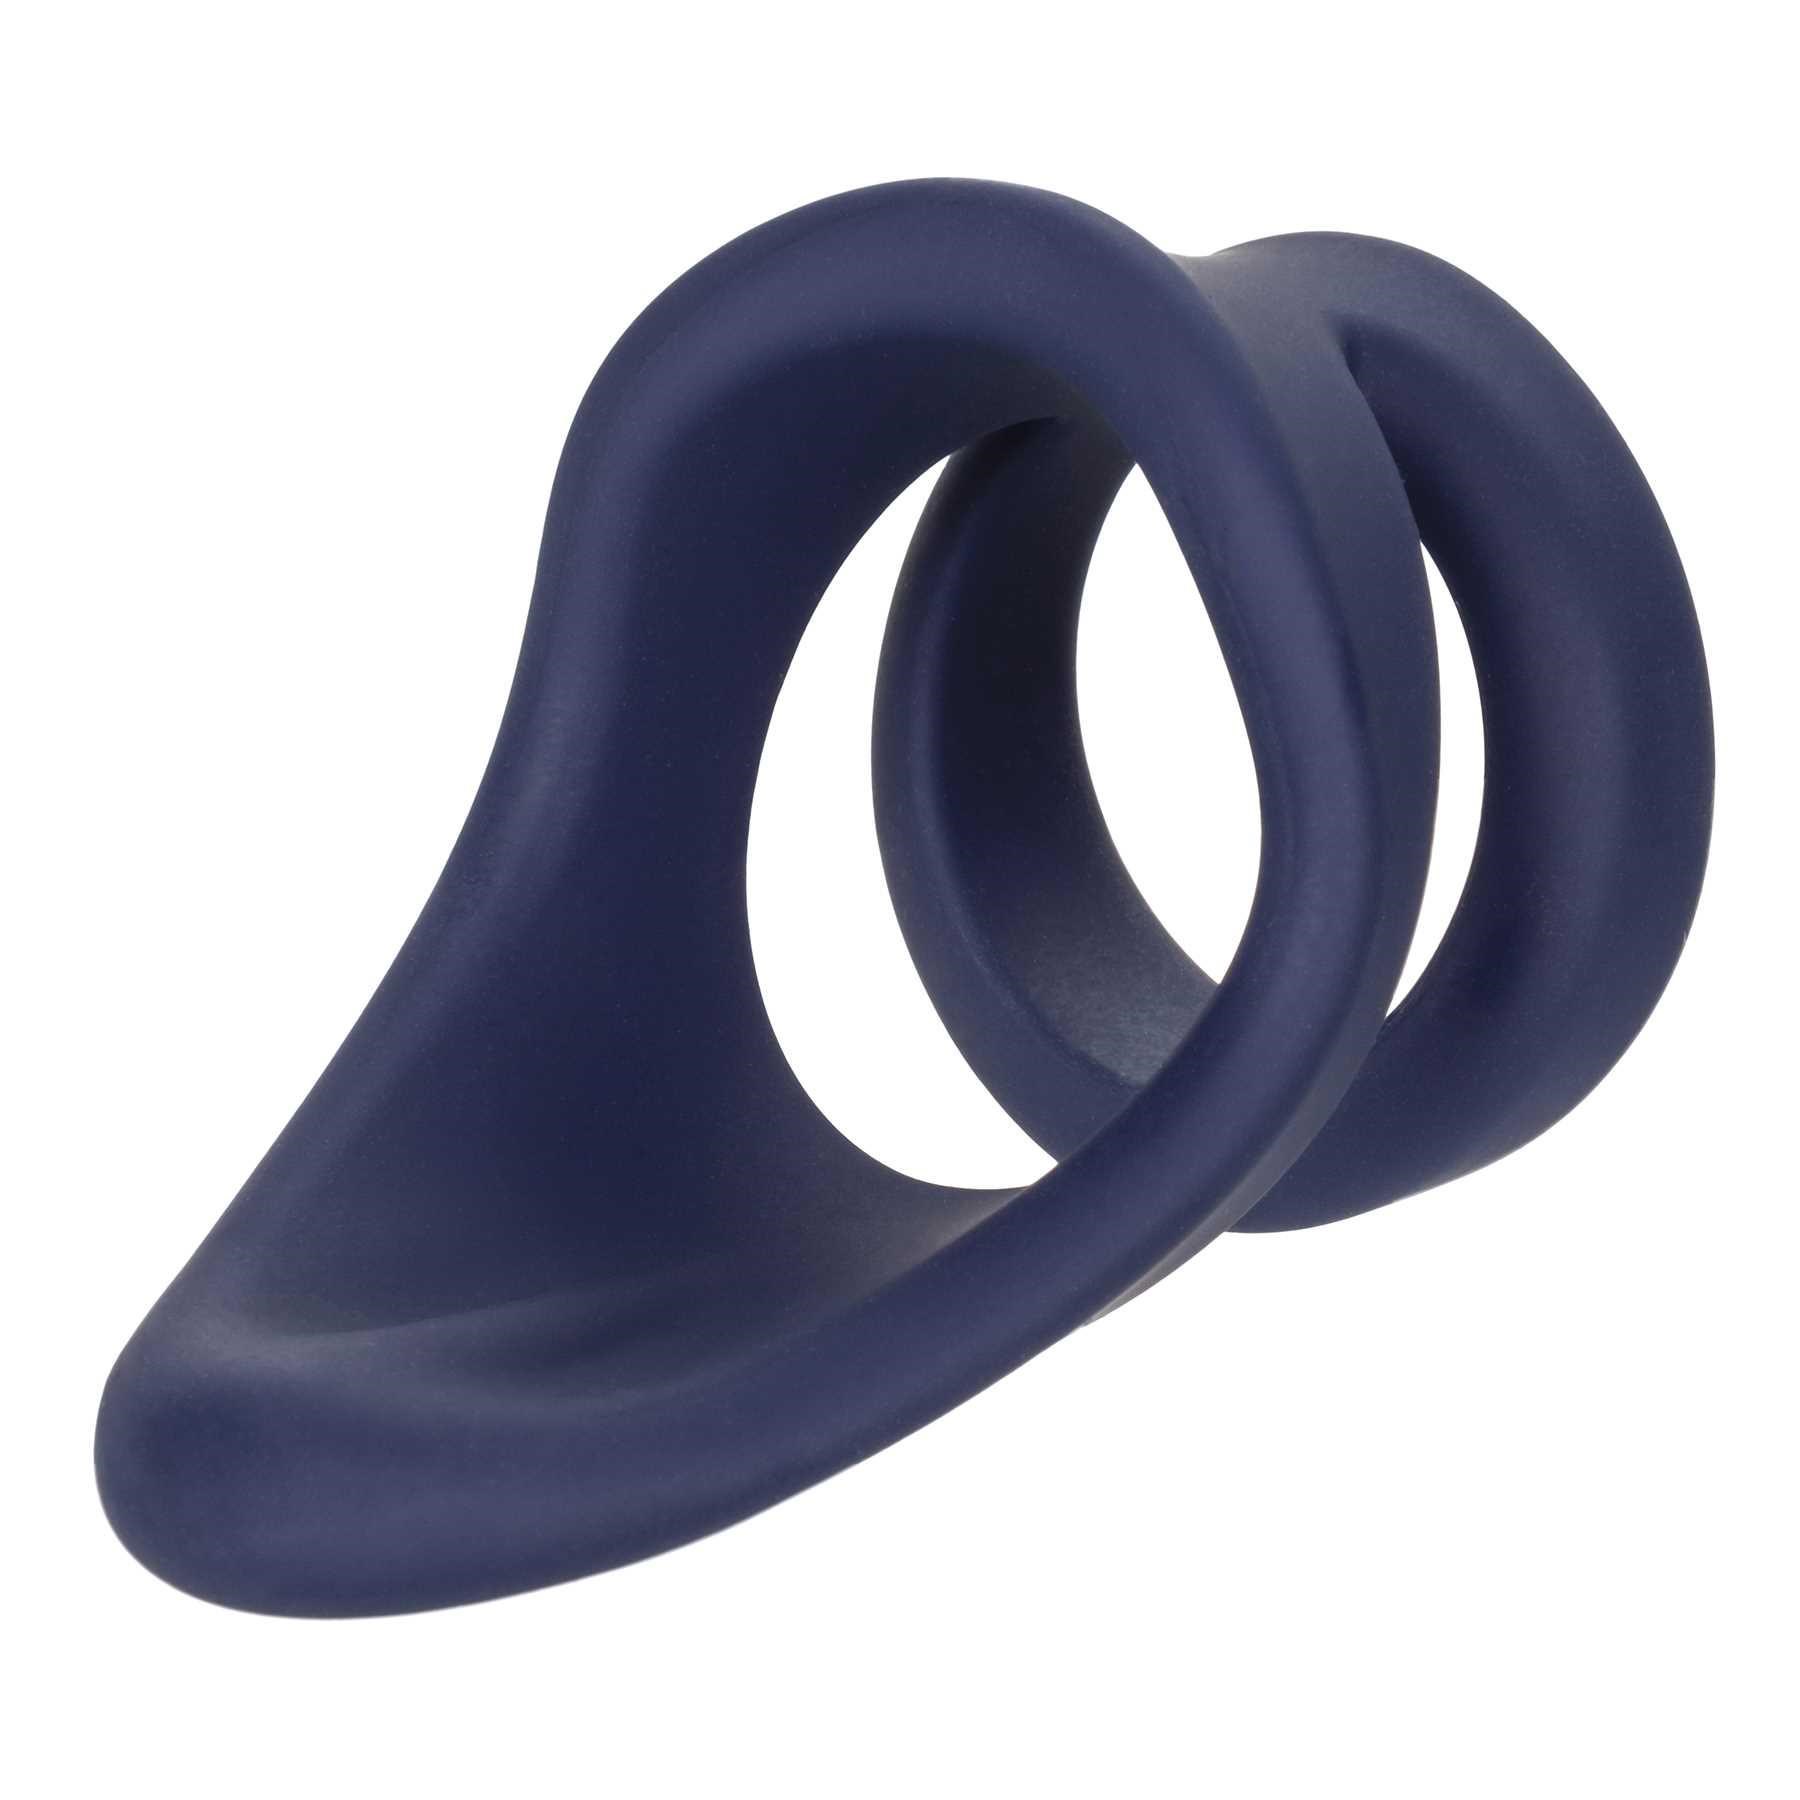 Viceroy Perineum Dual Ring product image 6